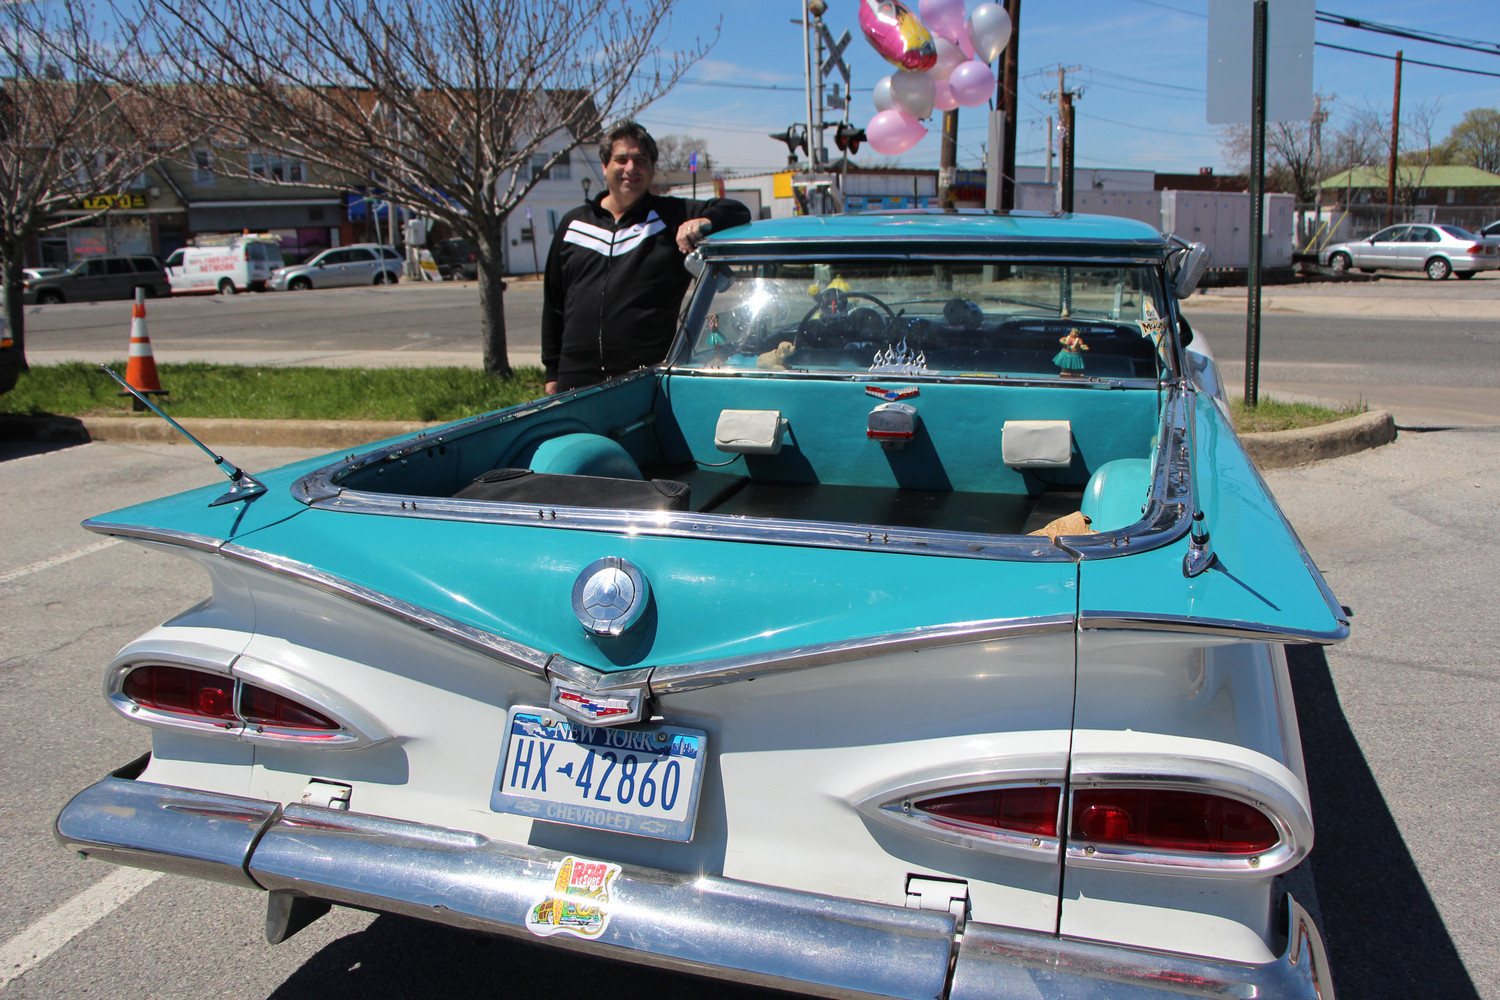 Dr. Wechsler of ROK Fitness, owner of the 1959 Chevy El Camino, orginal food tray with original speaker hanging from the window.